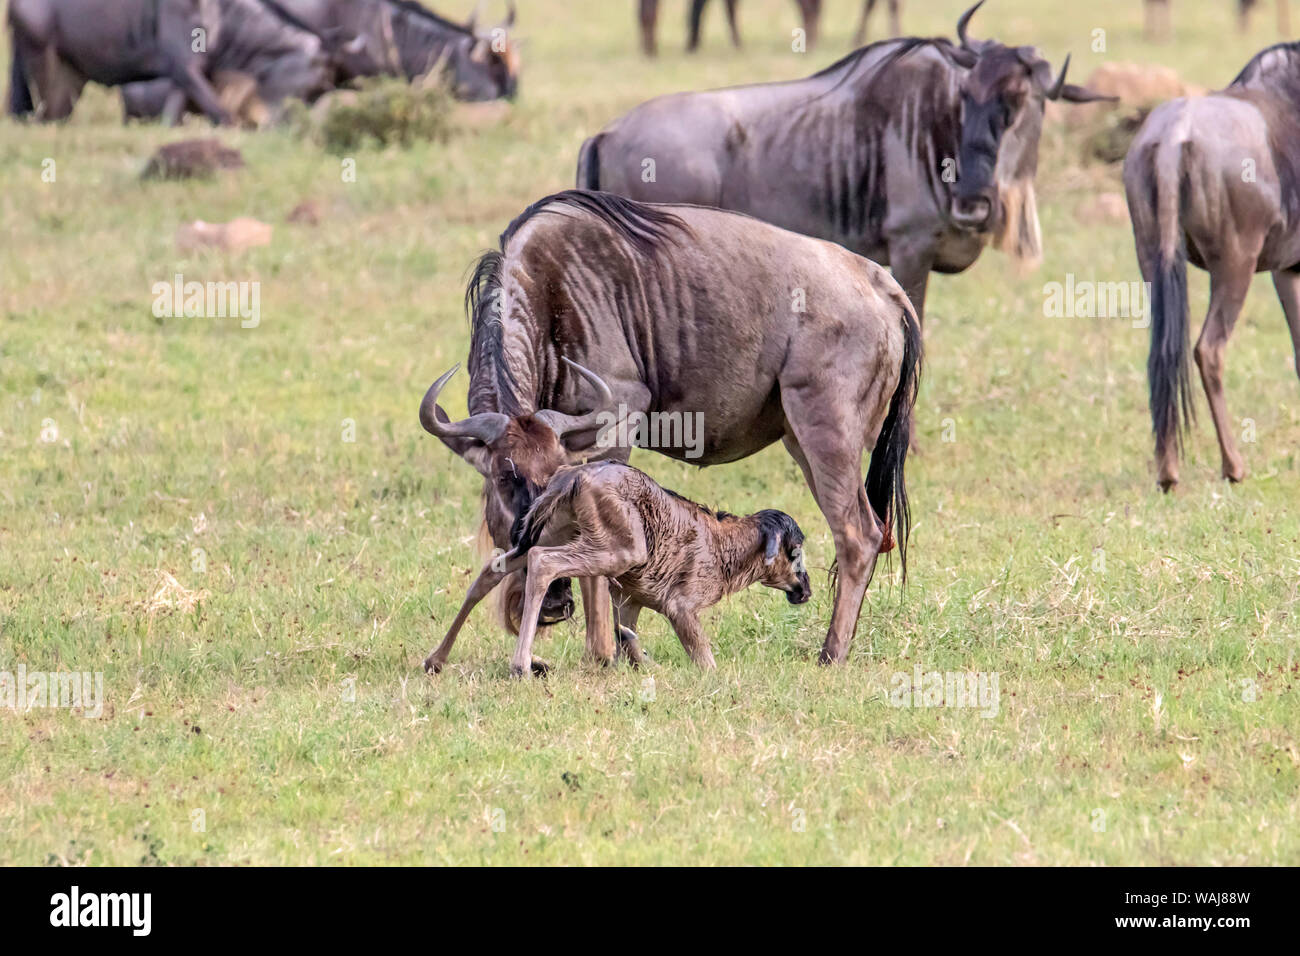 Africa, Tanzania, Ngorongoro Crater. Wildebeest (Connochaetes taurinus) mother and calf seven minutes after birth. Calf cannot yet stand. Stock Photo